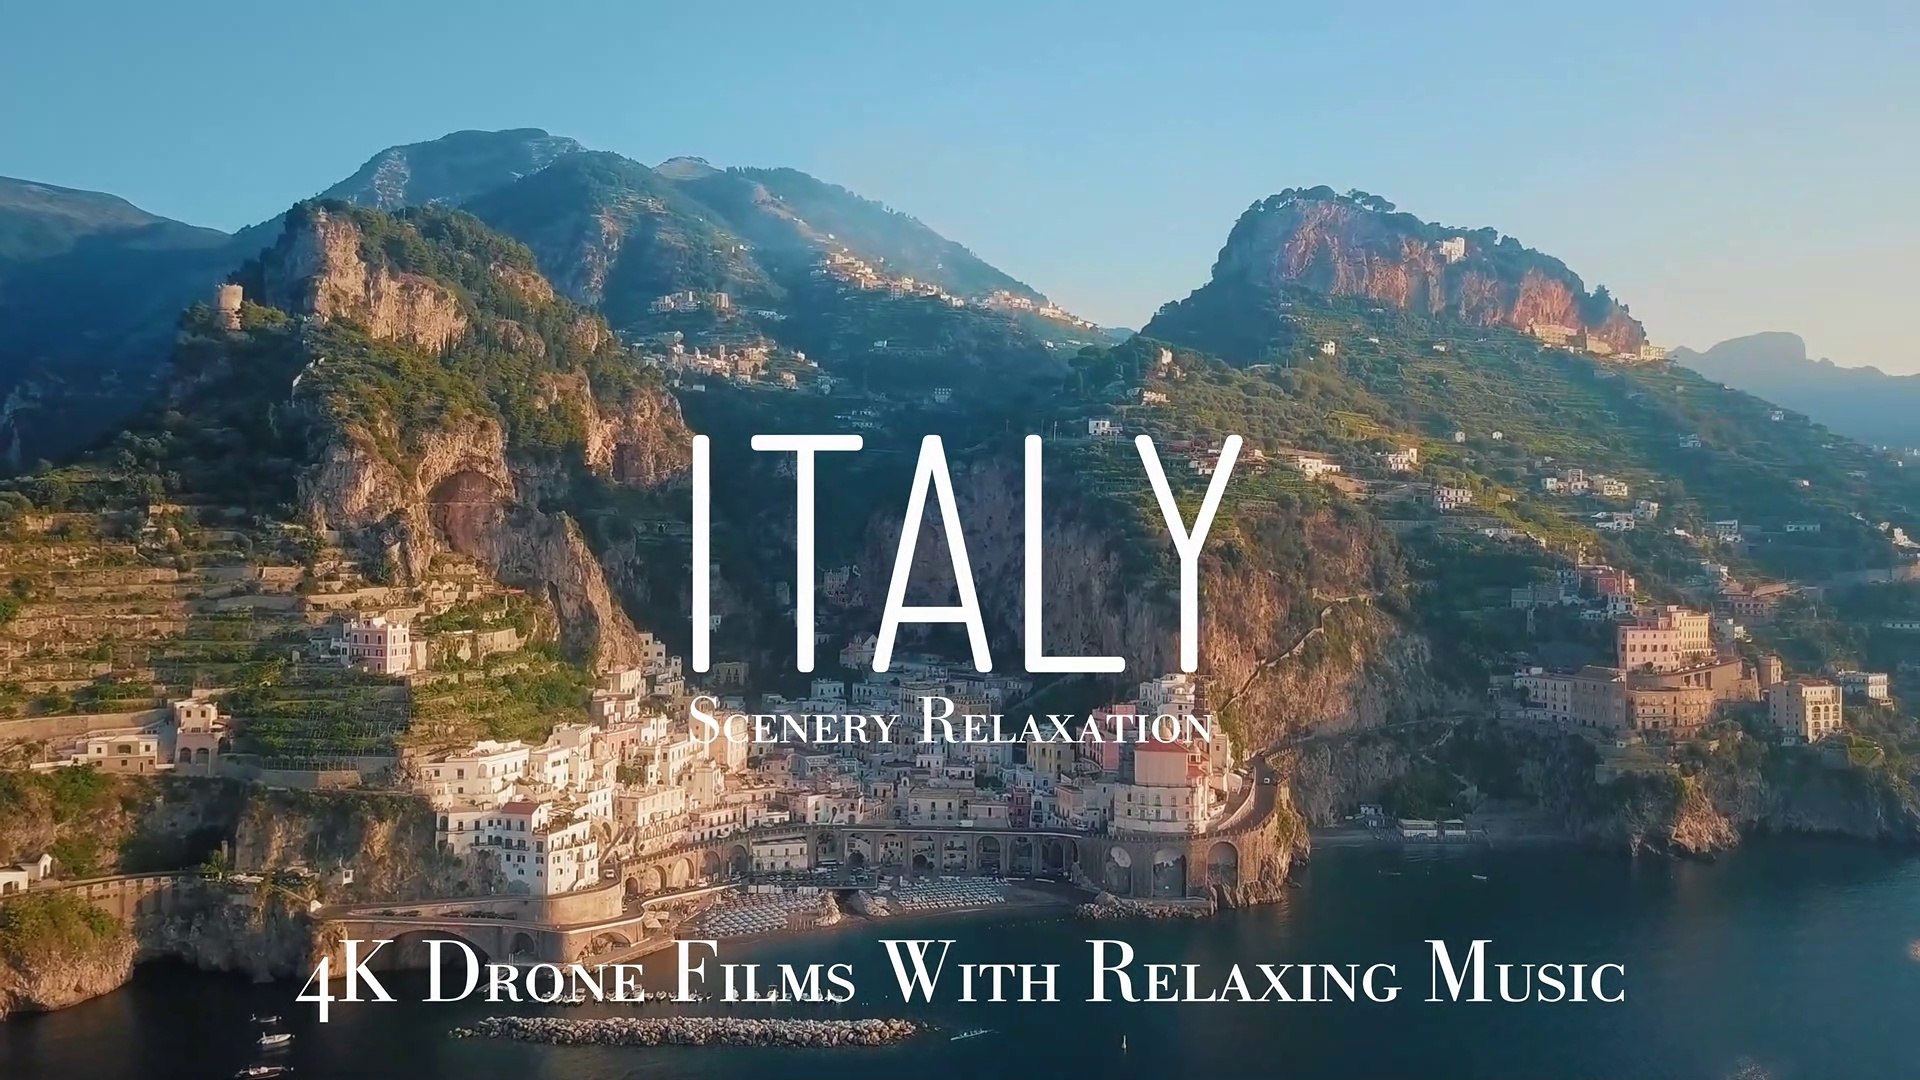 Italy 4K - Scenery Relaxation Film - Scenic Drone Film With Calming Music  (Part-1) - video Dailymotion